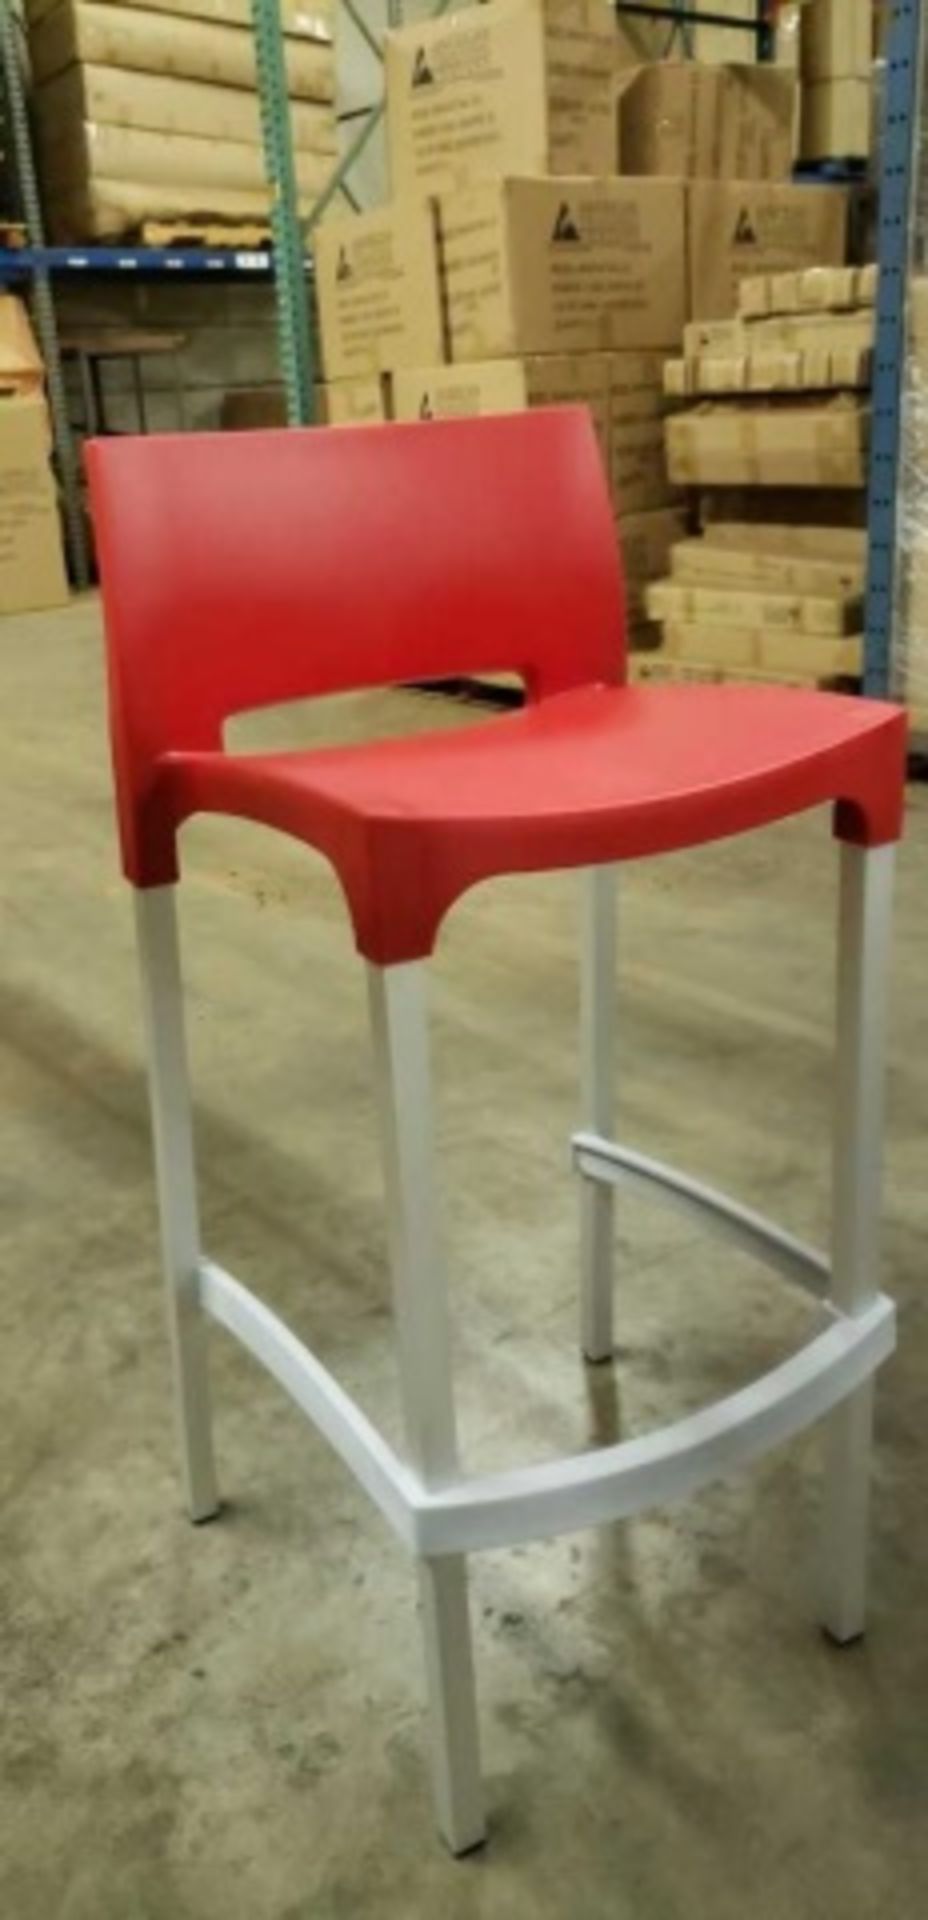 Dom / Gio Barstool With Back - Red. Square Tubular anodized matte aluminum legs, Resin seat and back - Image 2 of 4